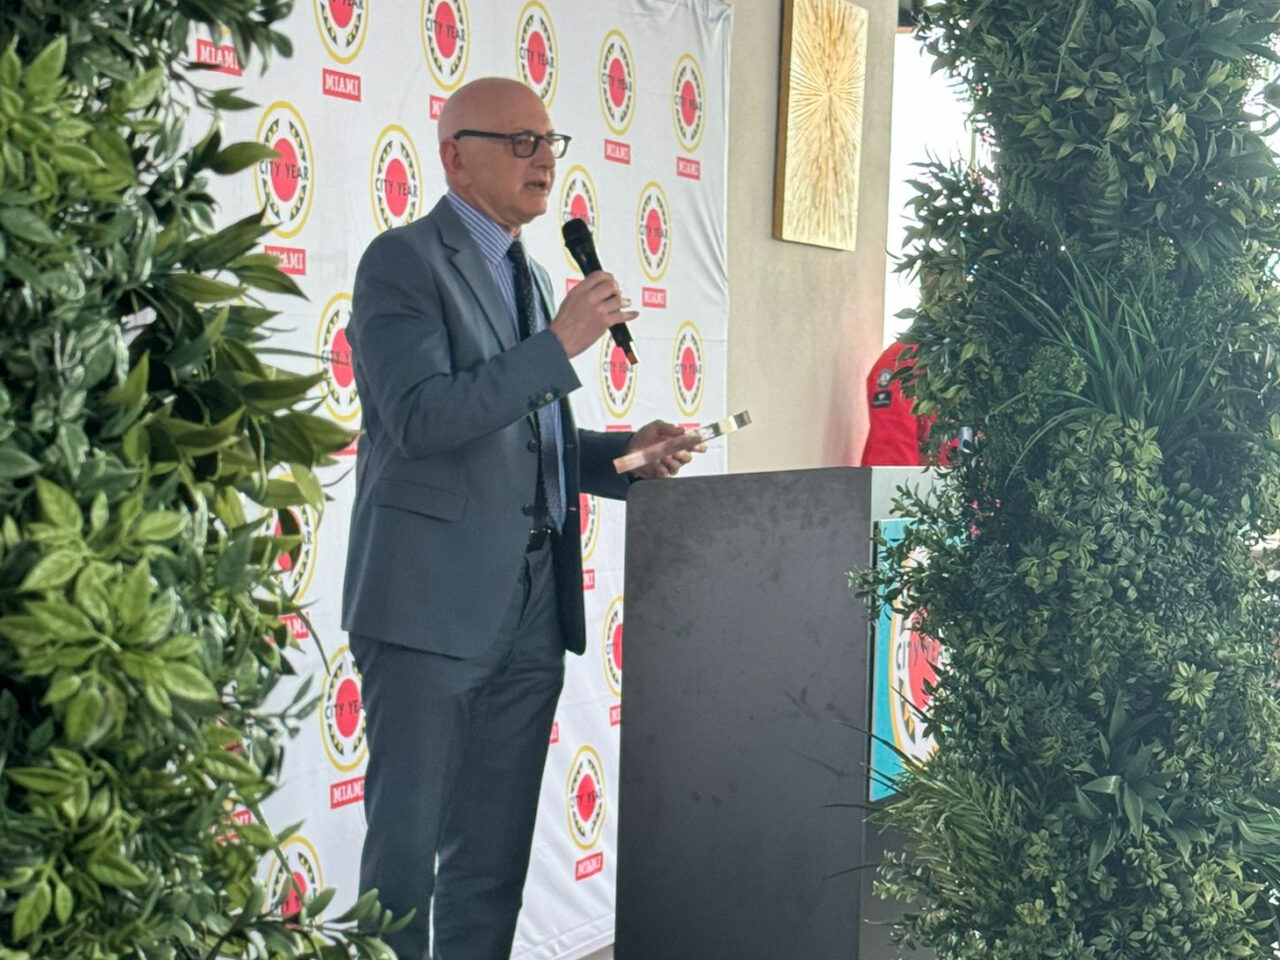 Defne Bayik: Congratulations Stephen D. Nimer of the Sylvester Comprehensive Cancer Center for the well-deserved mentorship award from City Year Miami!